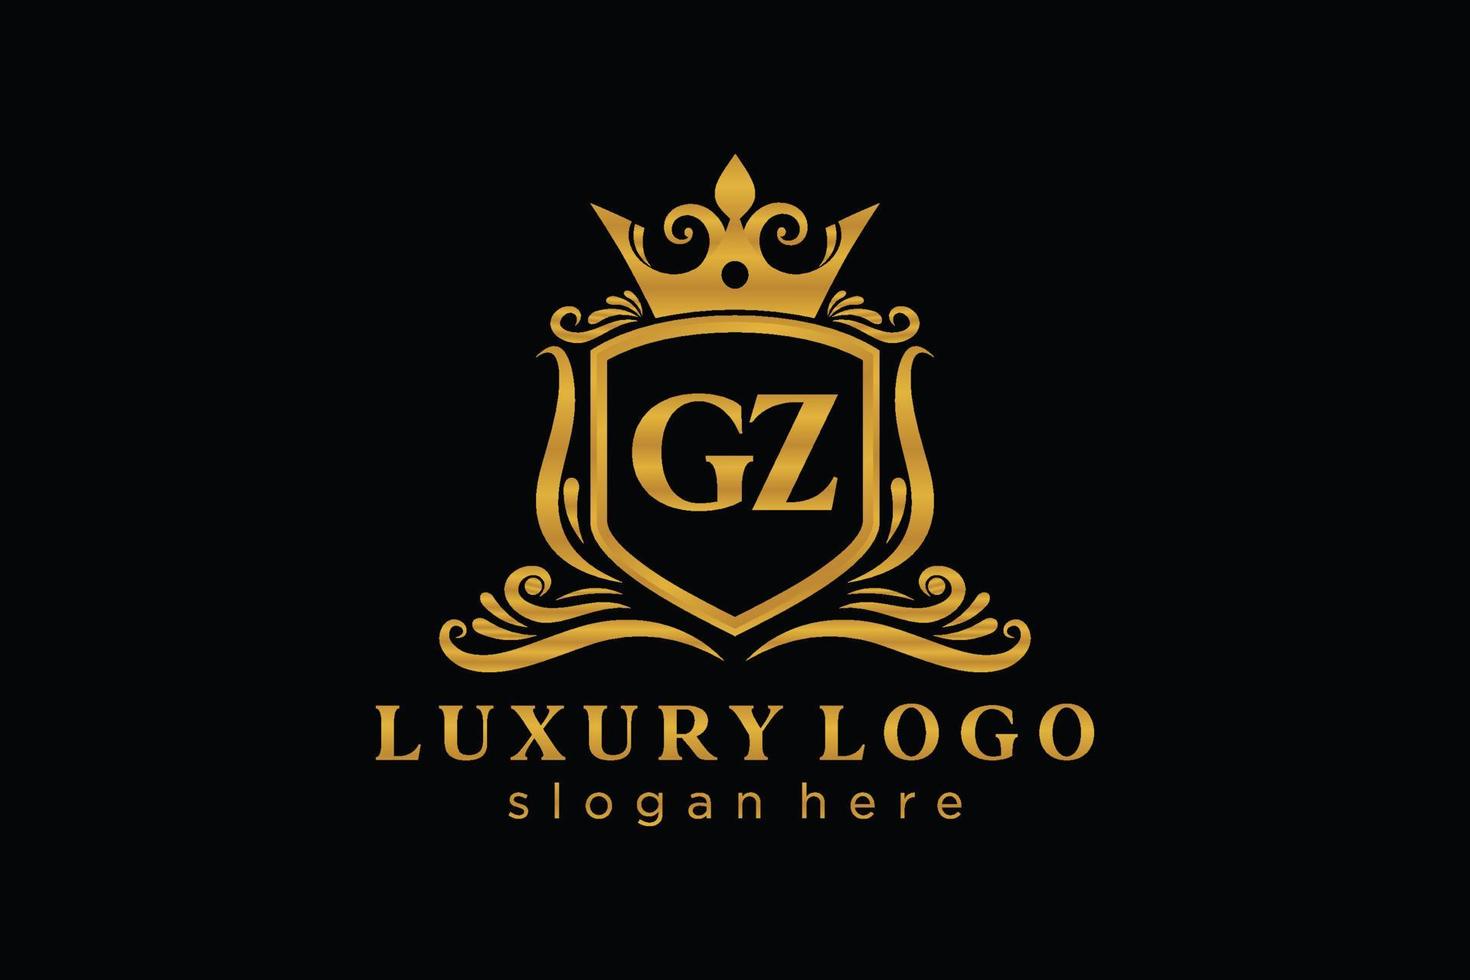 Initial GZ Letter Royal Luxury Logo template in vector art for Restaurant, Royalty, Boutique, Cafe, Hotel, Heraldic, Jewelry, Fashion and other vector illustration.